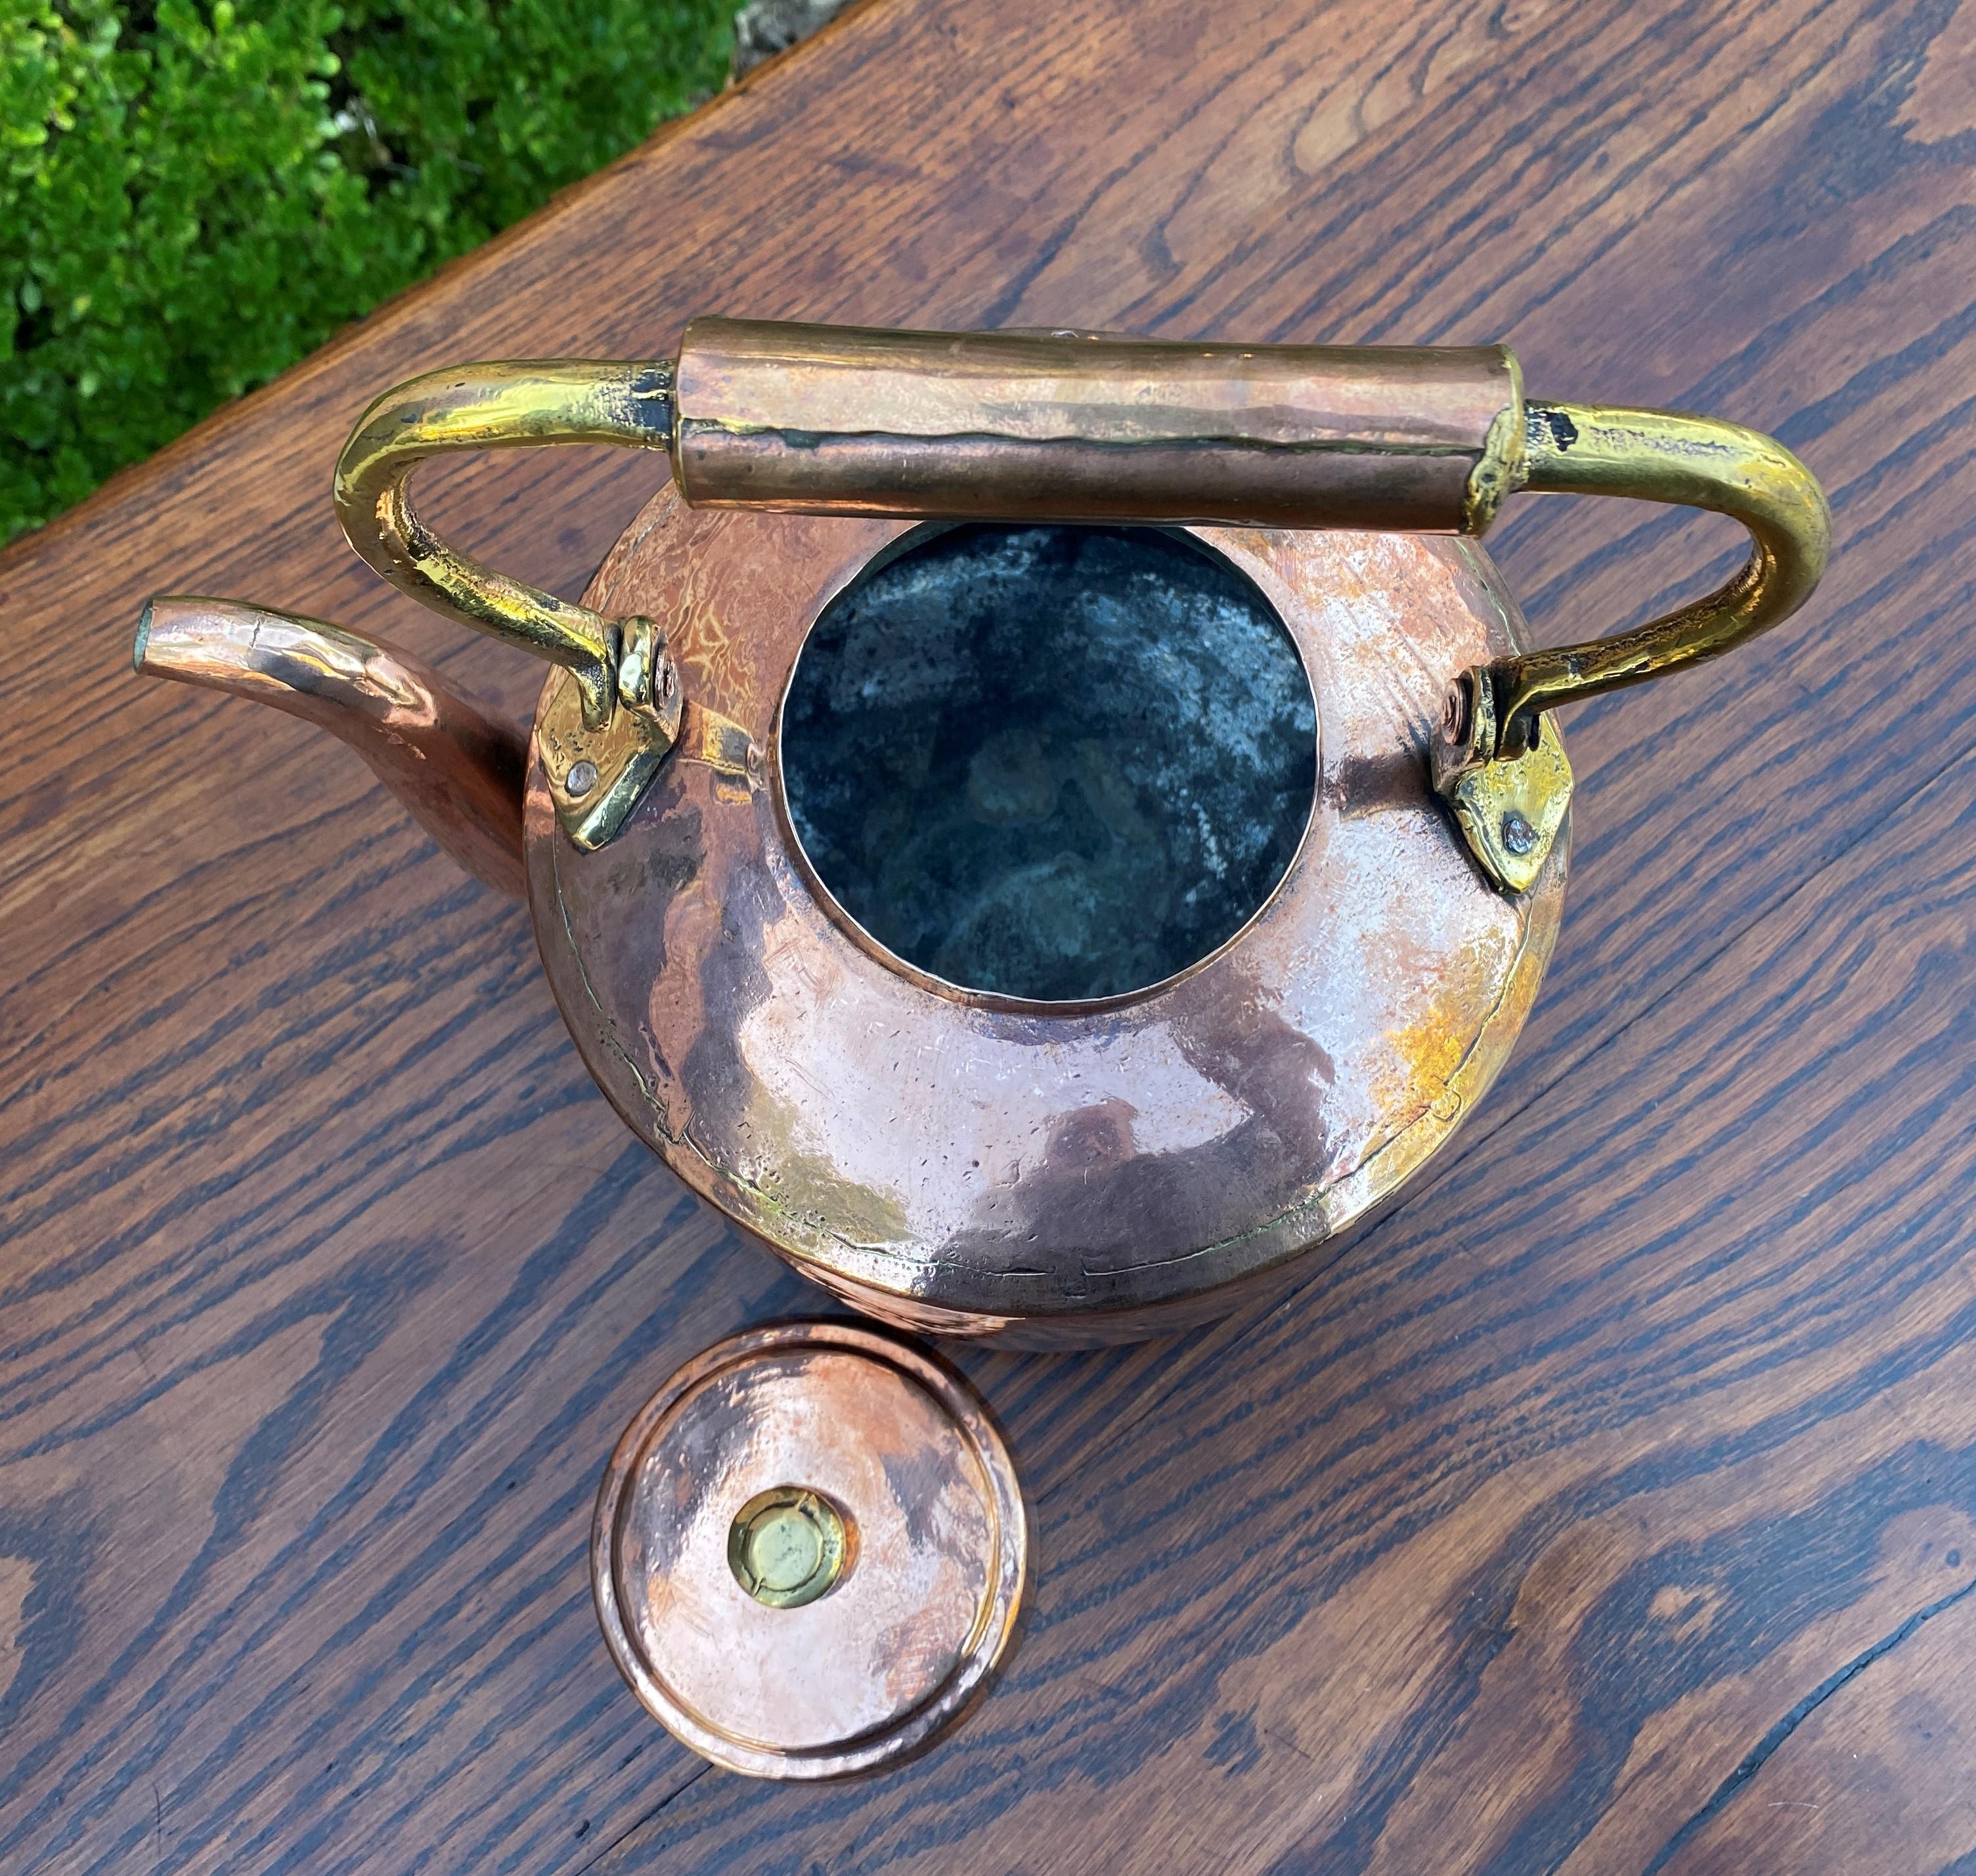 19th Century Antique English Copper & Brass Kettle Hand Seamed Tea Water Kettle, c. 1900